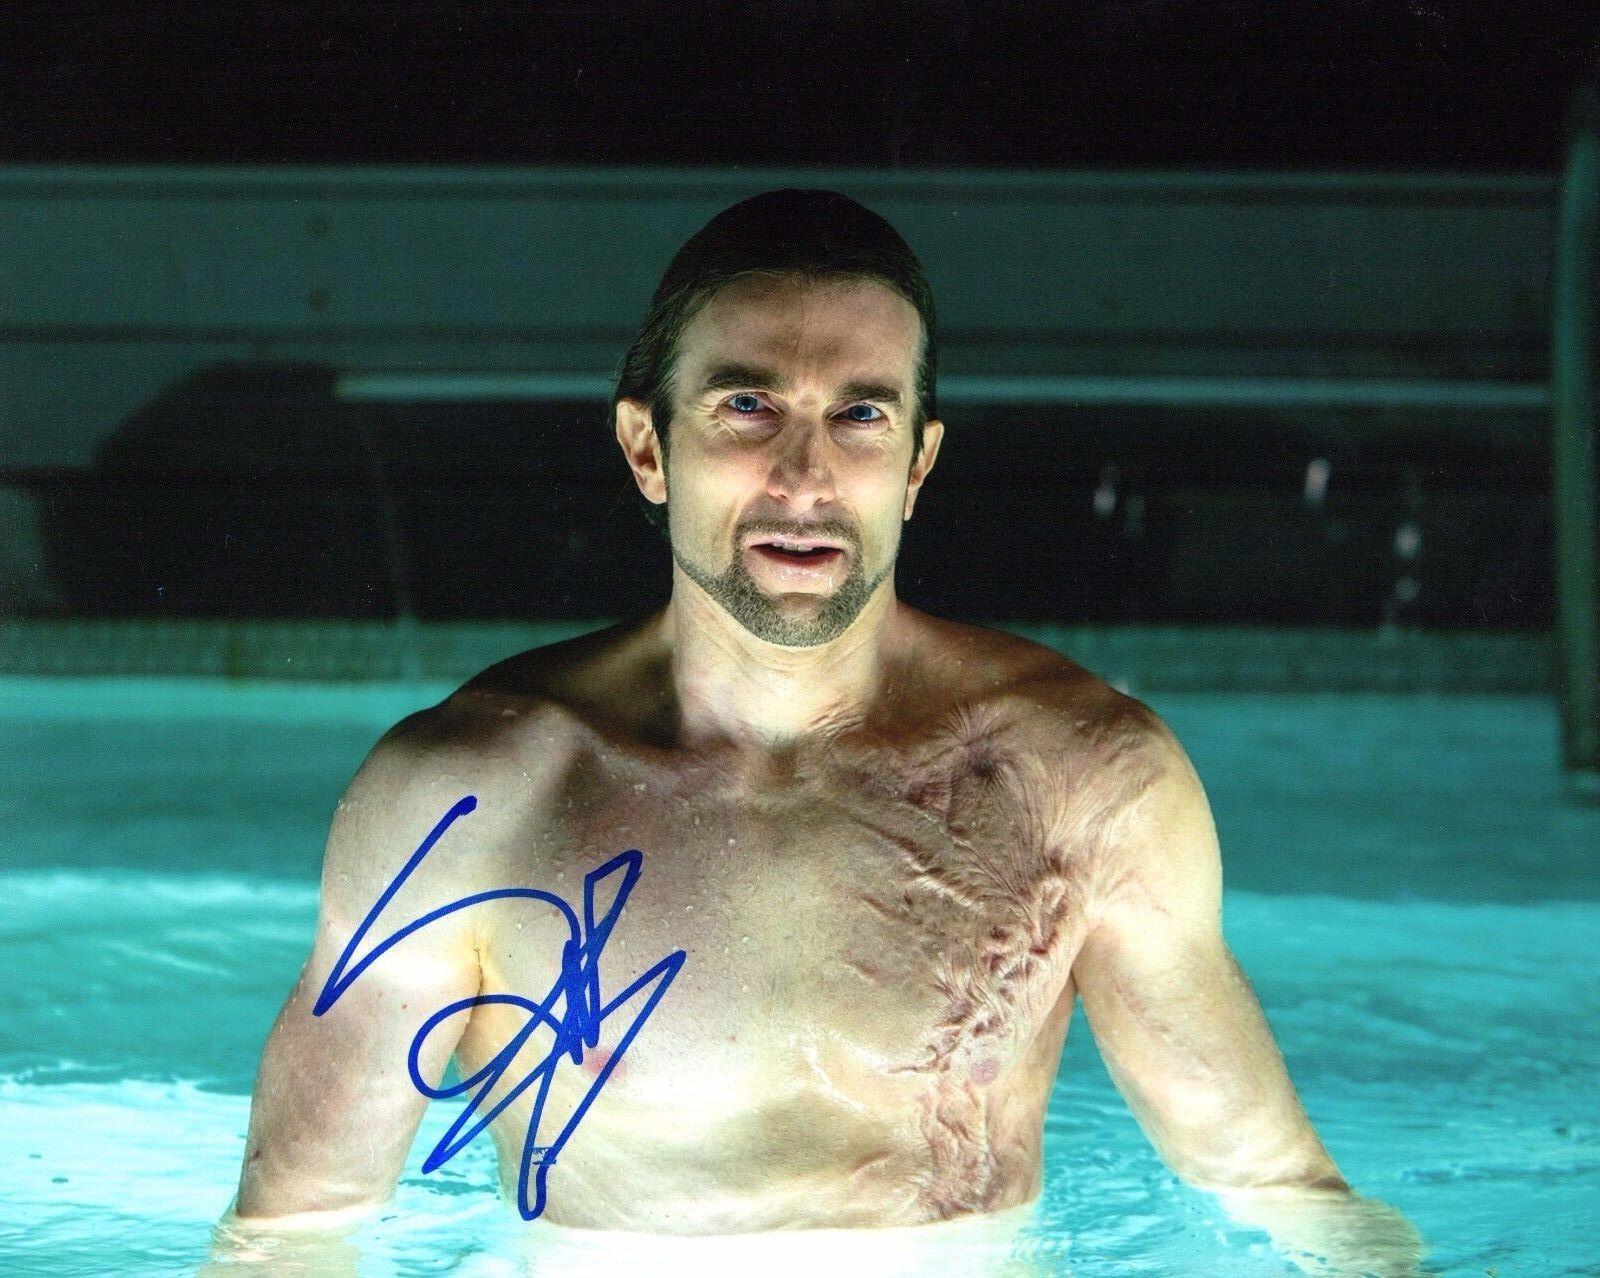 GFA Old Boy The Stranger * SHARLTO COPLEY * Signed Autograph 8x10 Photo Poster painting S6 COA